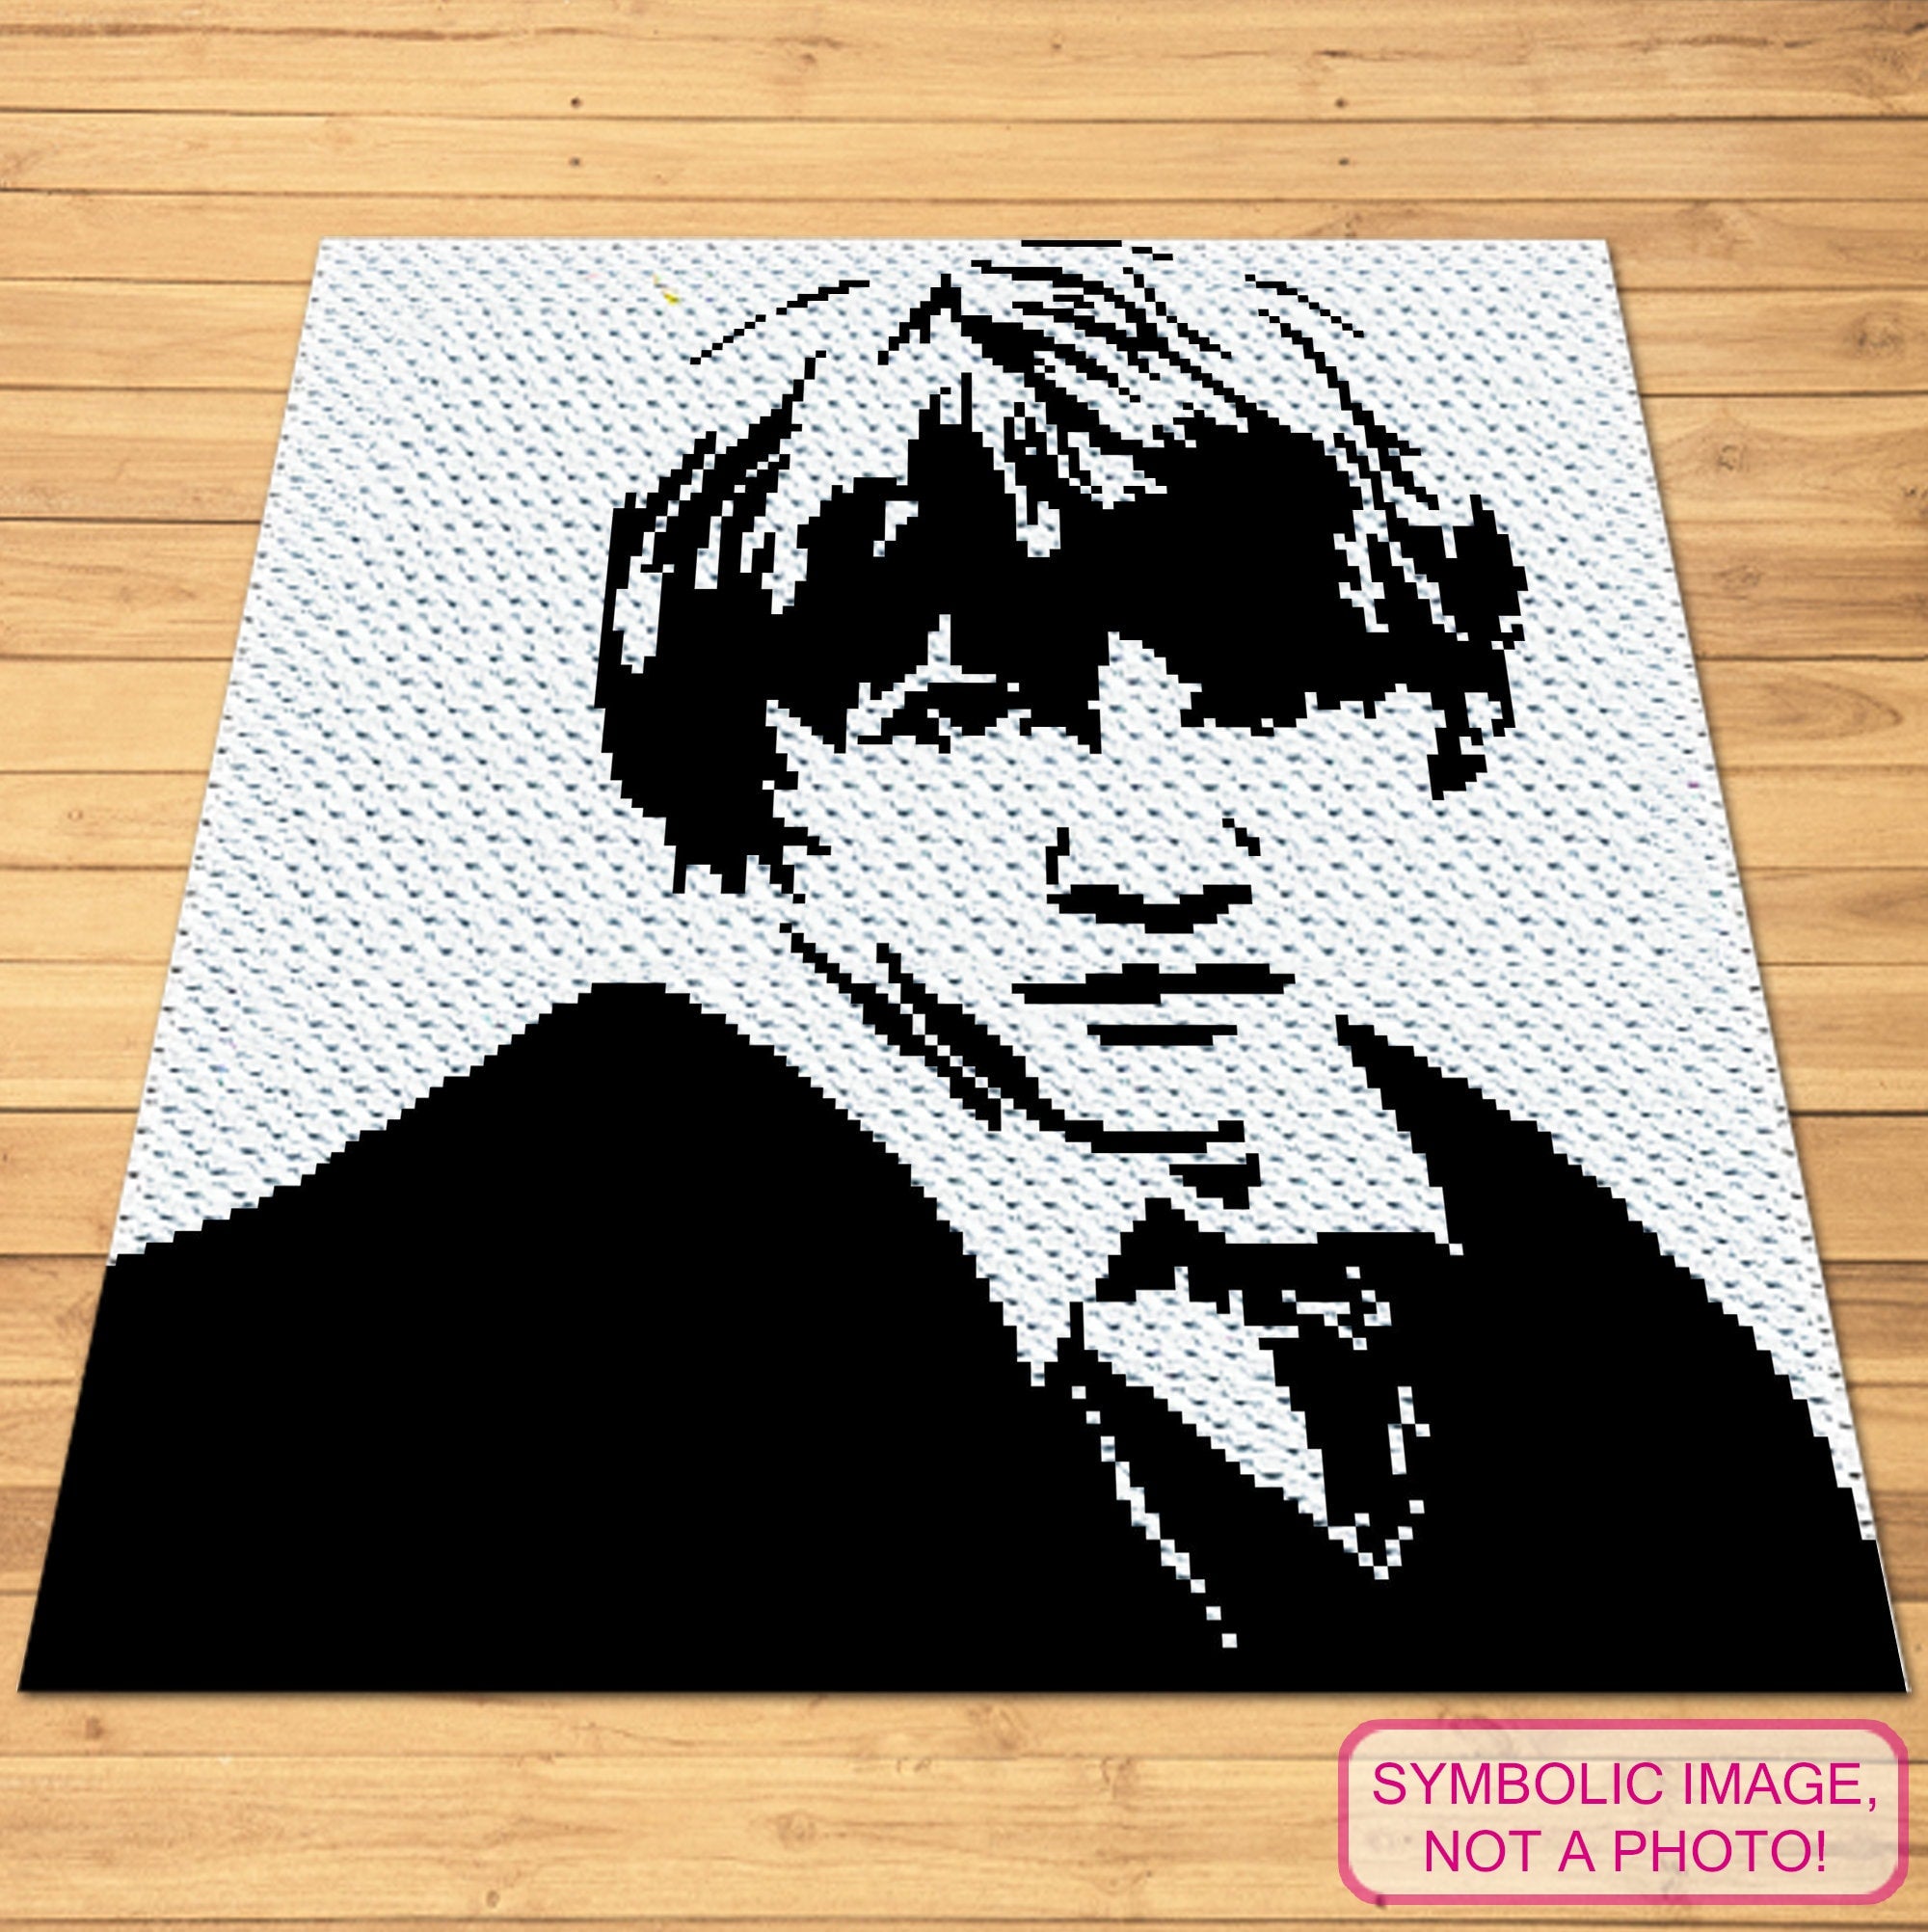 Harry Potter Patterns - Ron Weasly - Crochet Celebrity Rupert Grint is a Graph Pattern with Written Instructions for a Corner to Corner Crochet Blanket Pattern. Click to learn more!